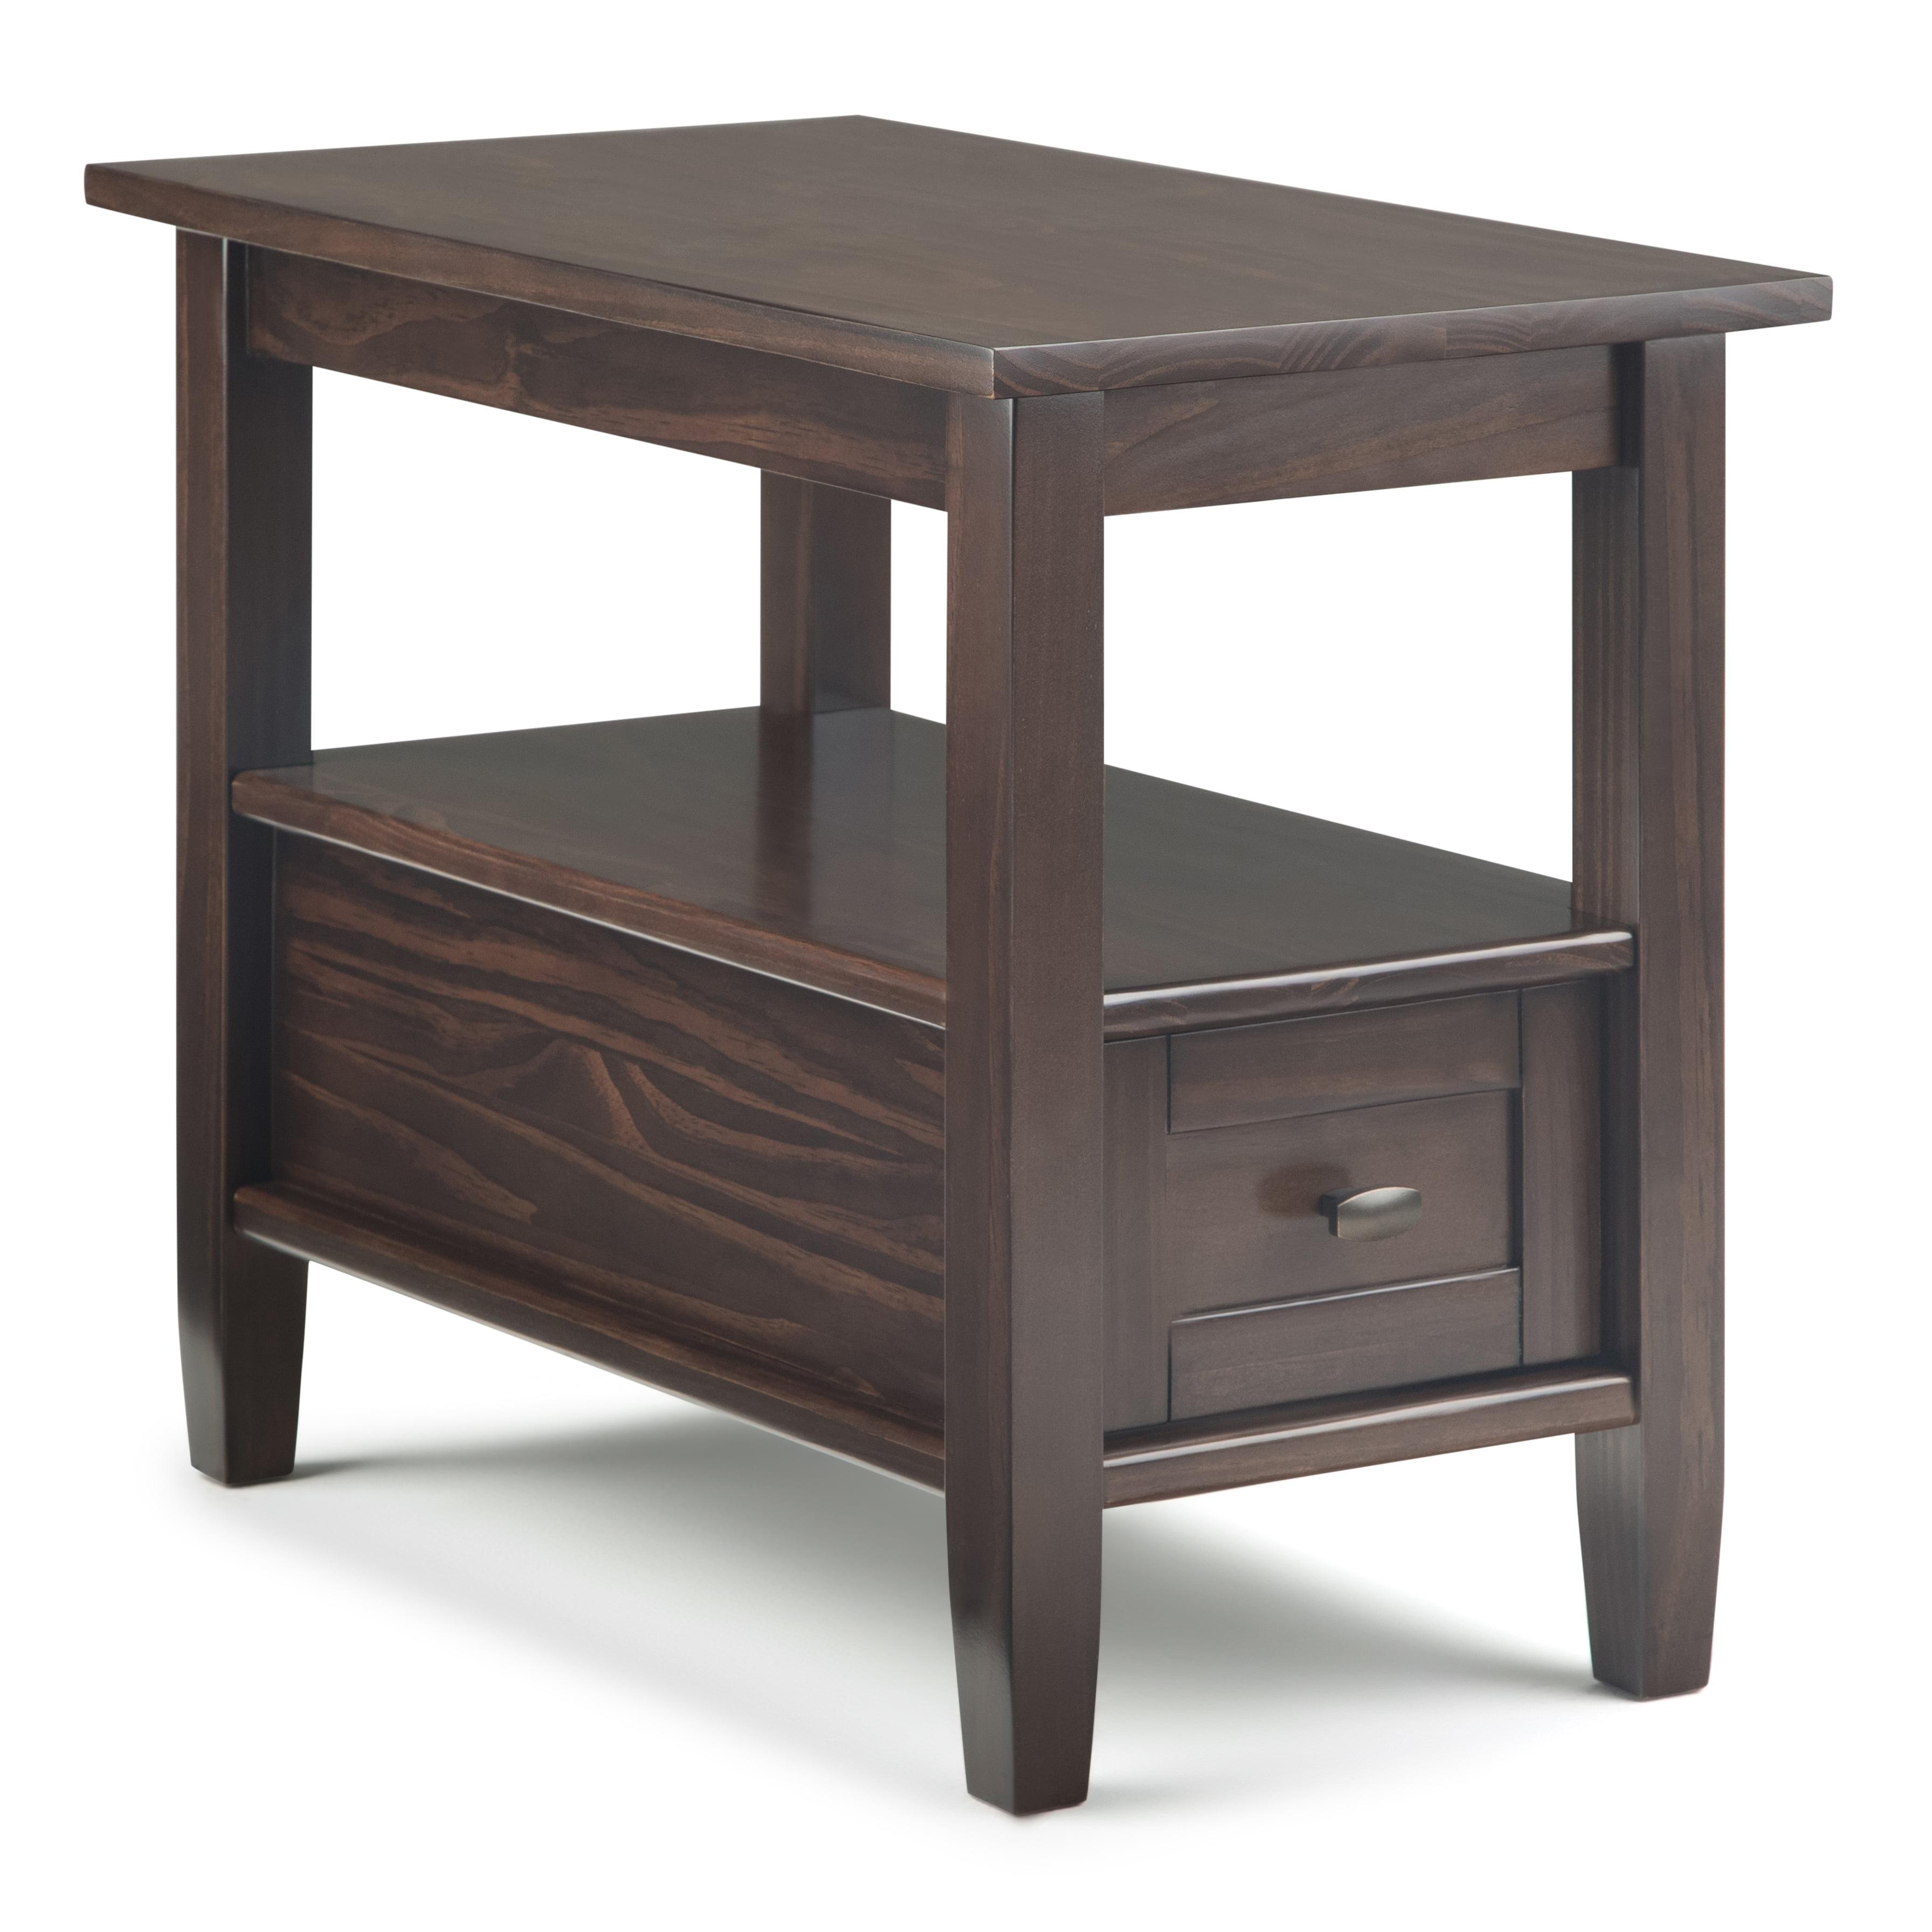 Tobacco Brown Solid Wood Narrow Side Table with Storage